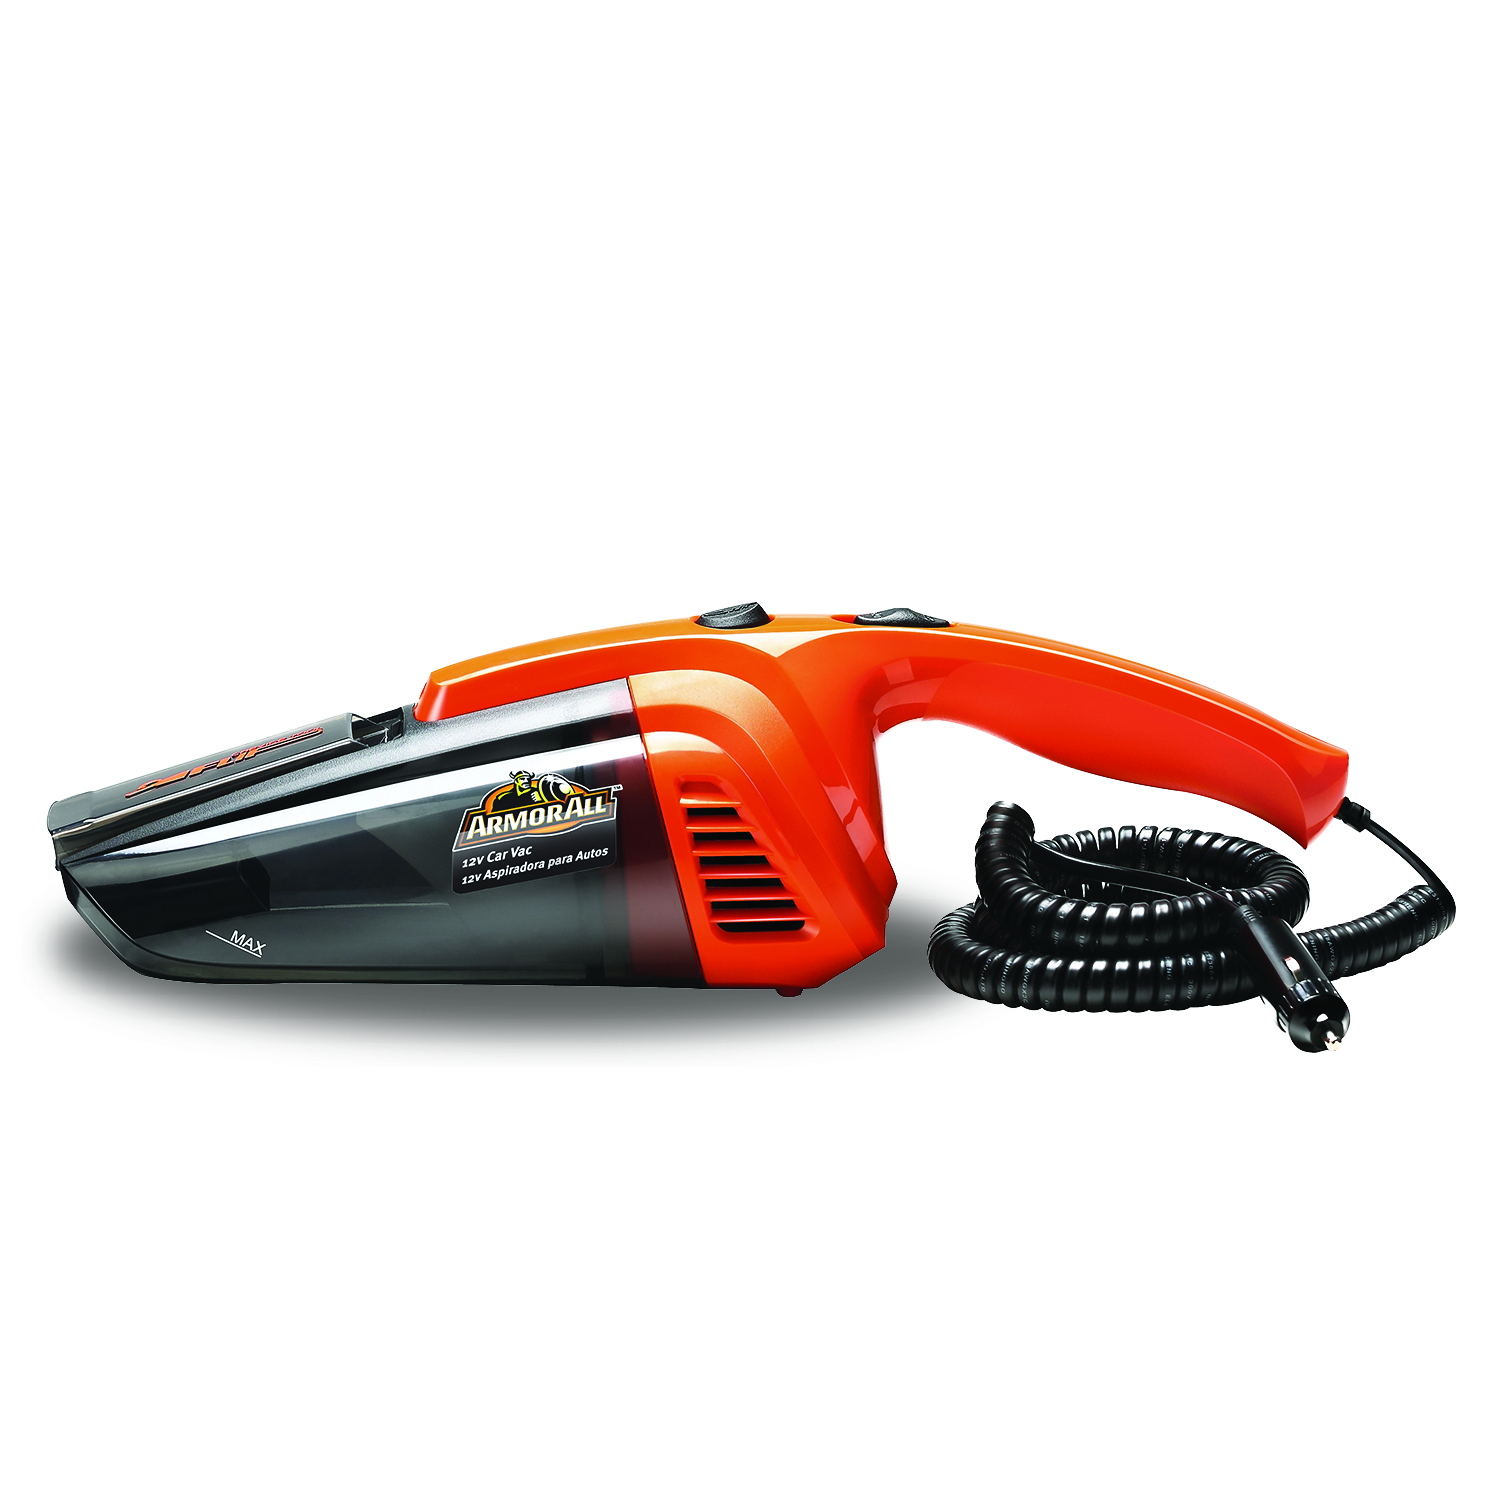 Armor All 12V Wet and Dry Bagless Car Vacuum, AA12V1 0902 - image 1 of 8